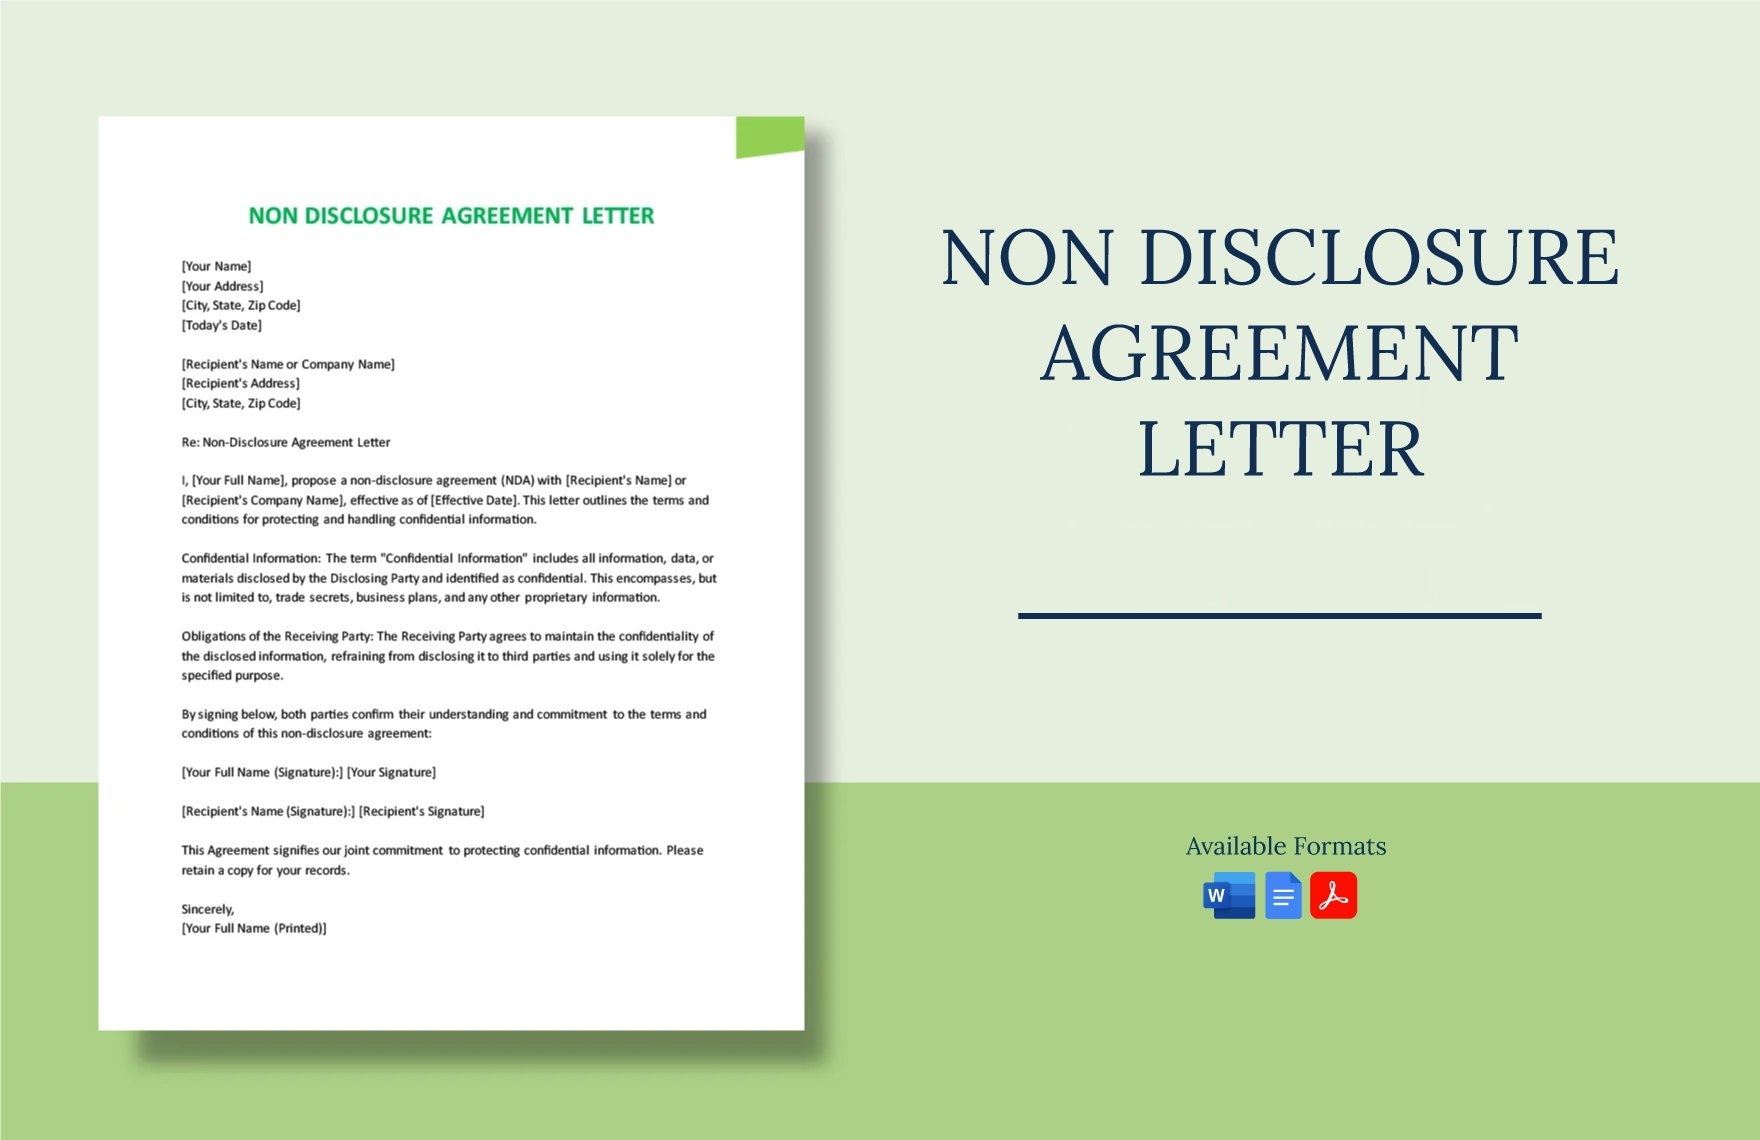 Non Disclosure Agreement Letter in Word, Google Docs, PDF